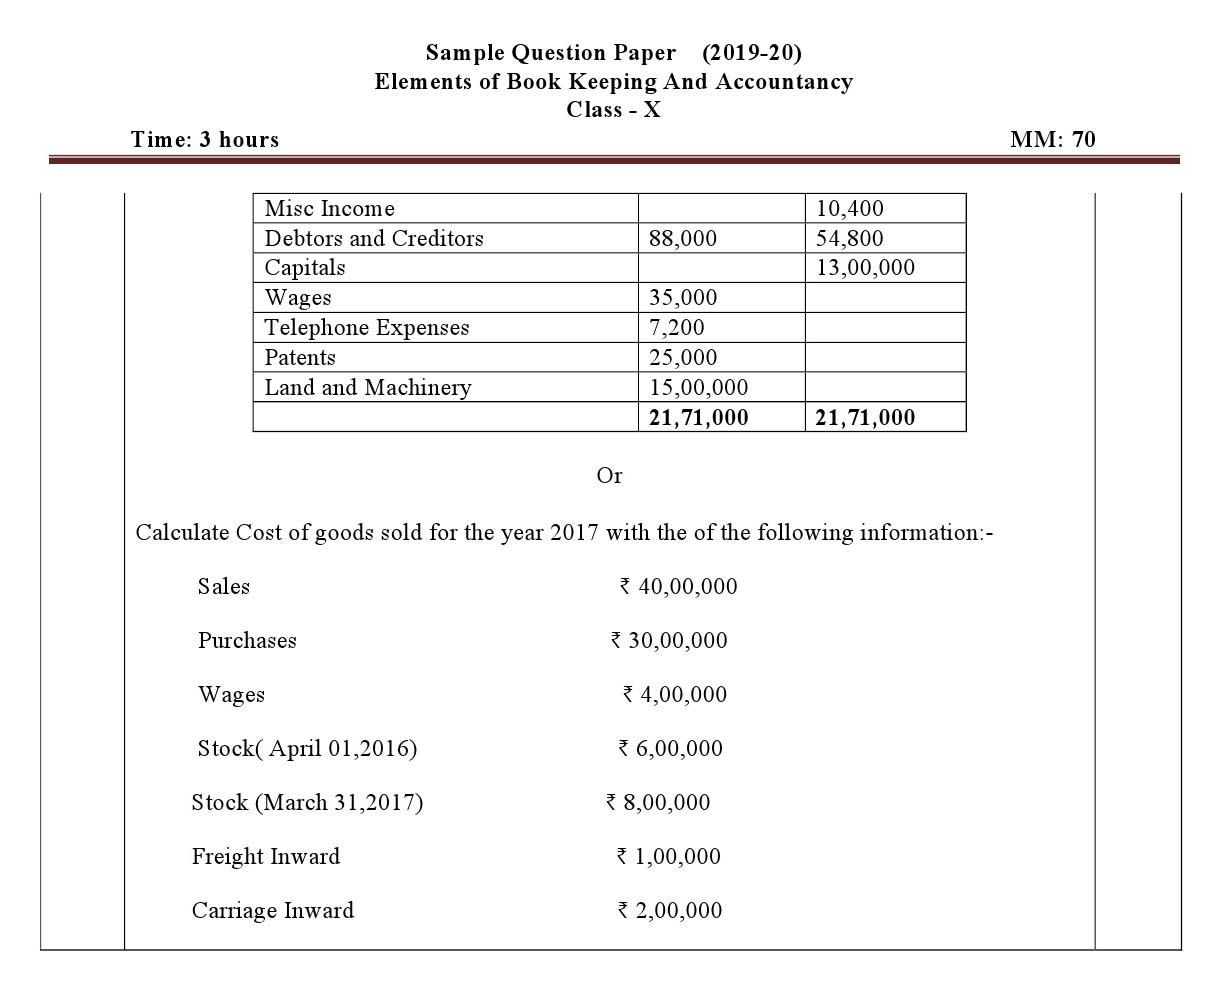 Elements of Book Keeping And Accountancy CBSE Class X Sample Question Paper 2019 20 - Image 5